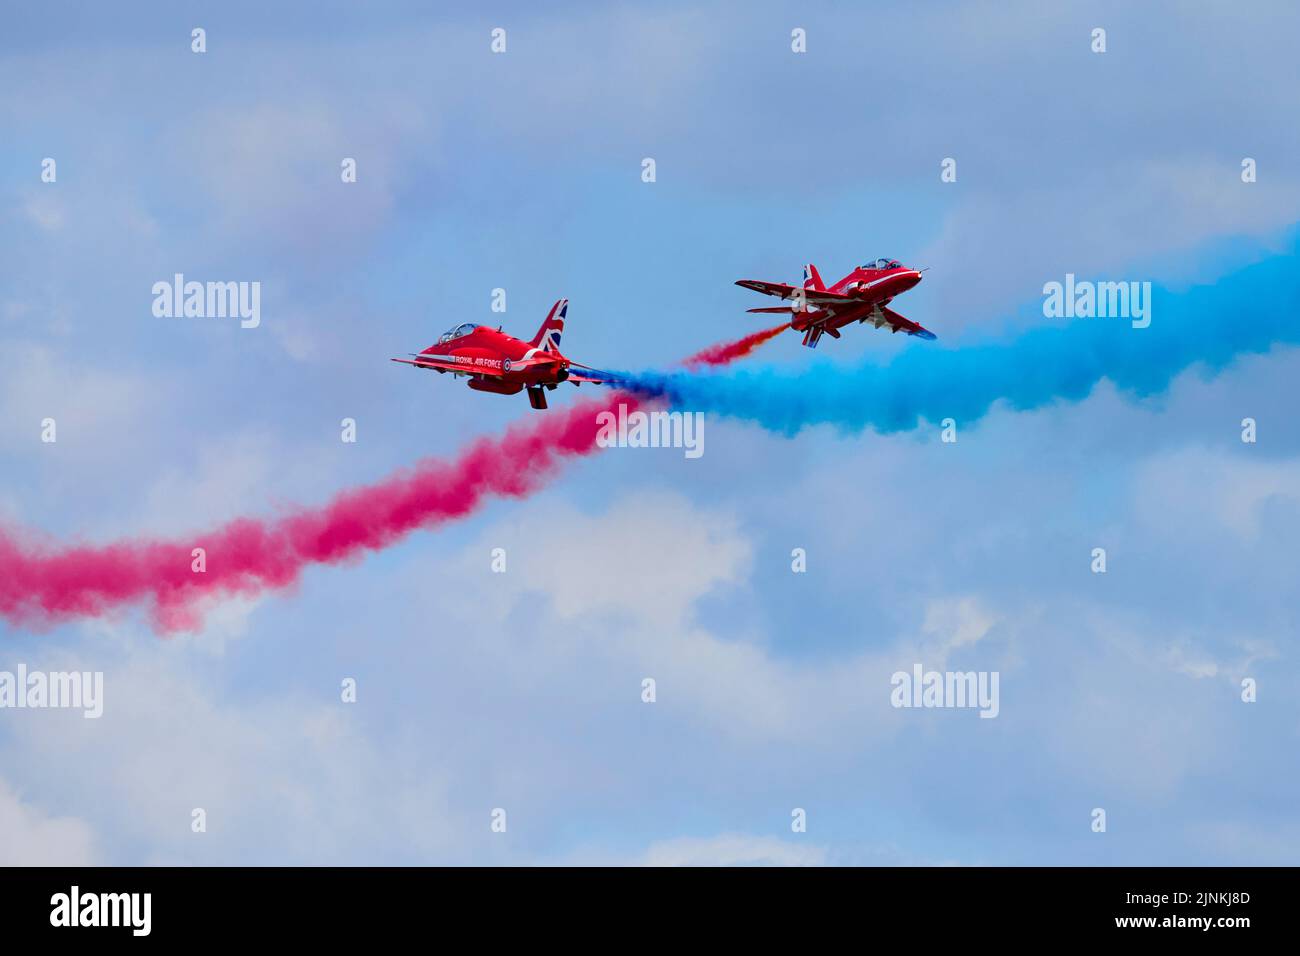 RAF Red Arrows Display team Crossover Stock Photo